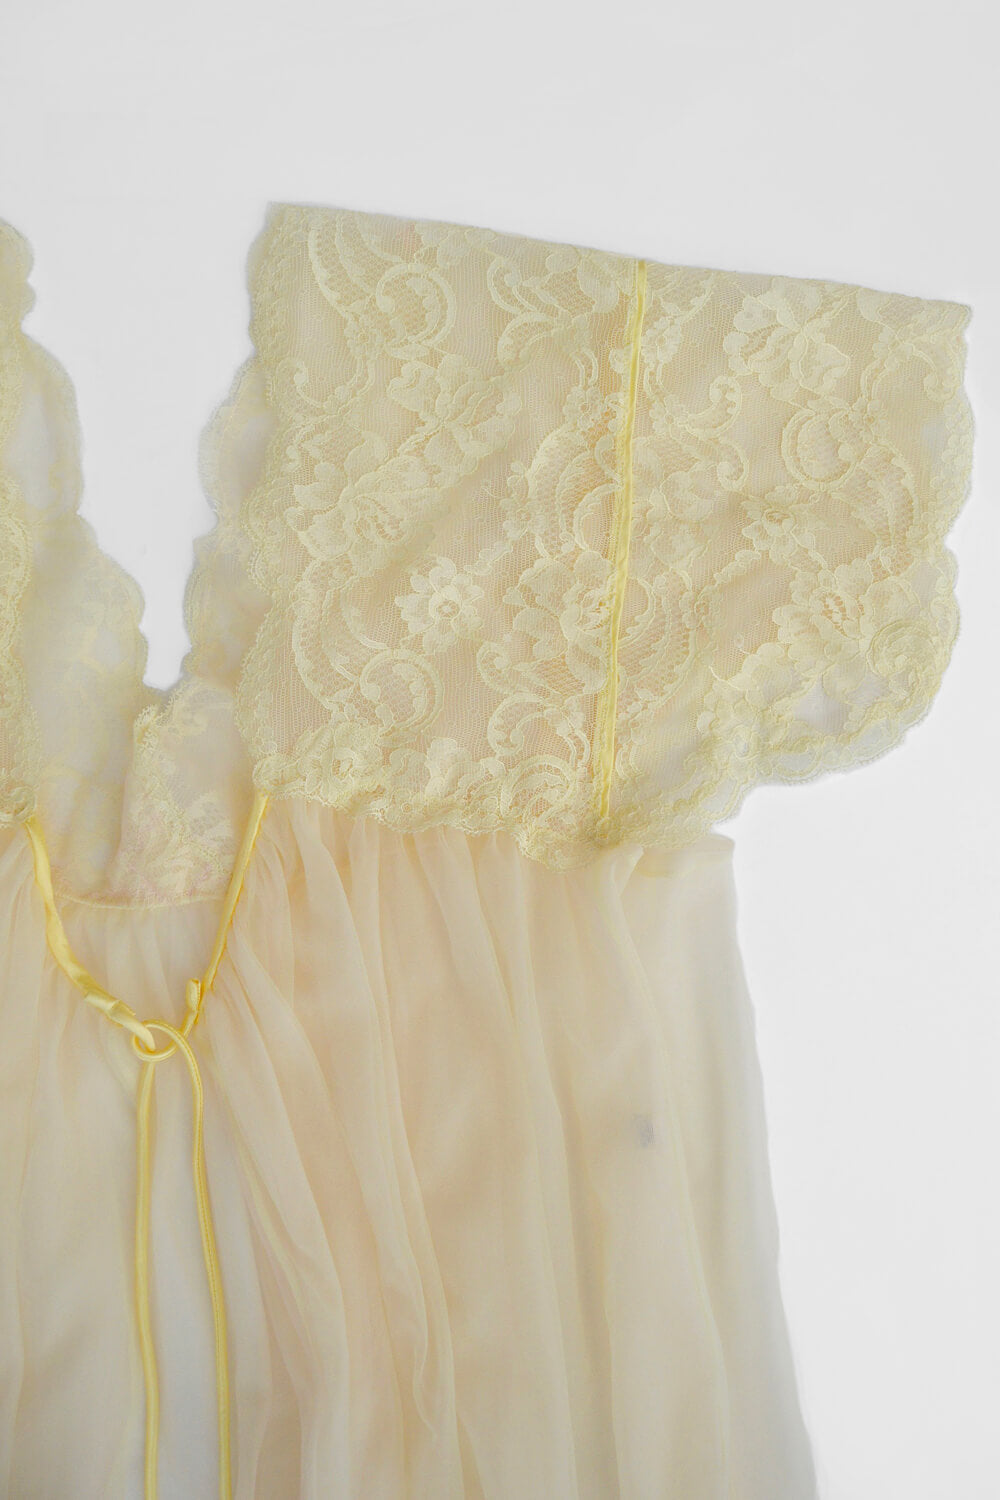 vintage 1950s sheer dressing gown - pale yellow - size 36